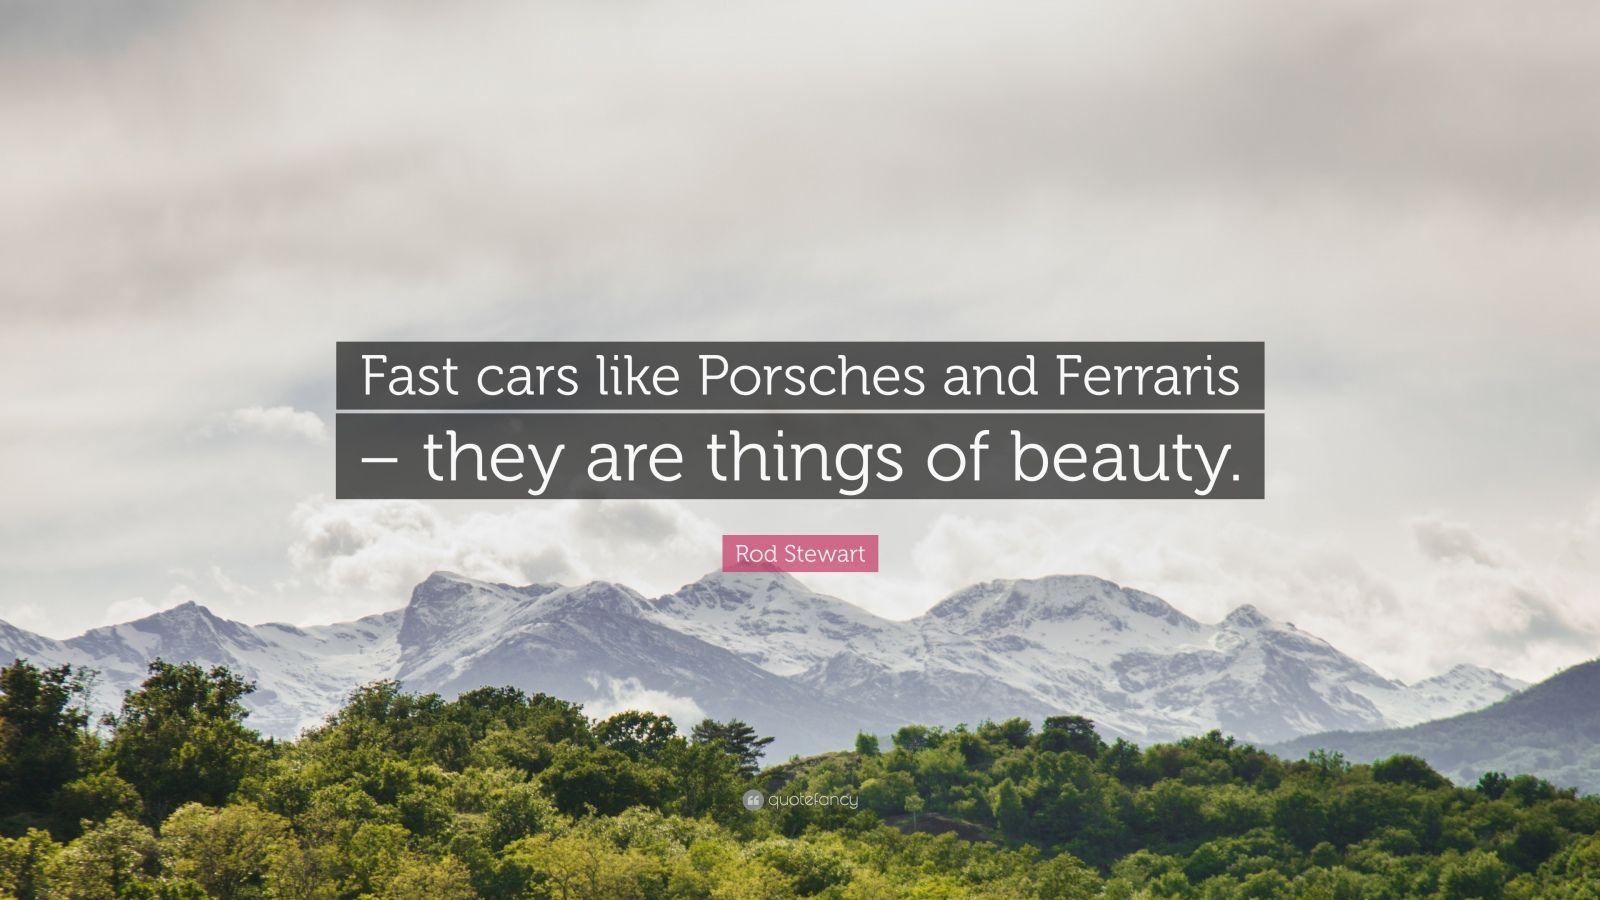 Rod Stewart Quote: “Fast cars like Porsches and Ferraris